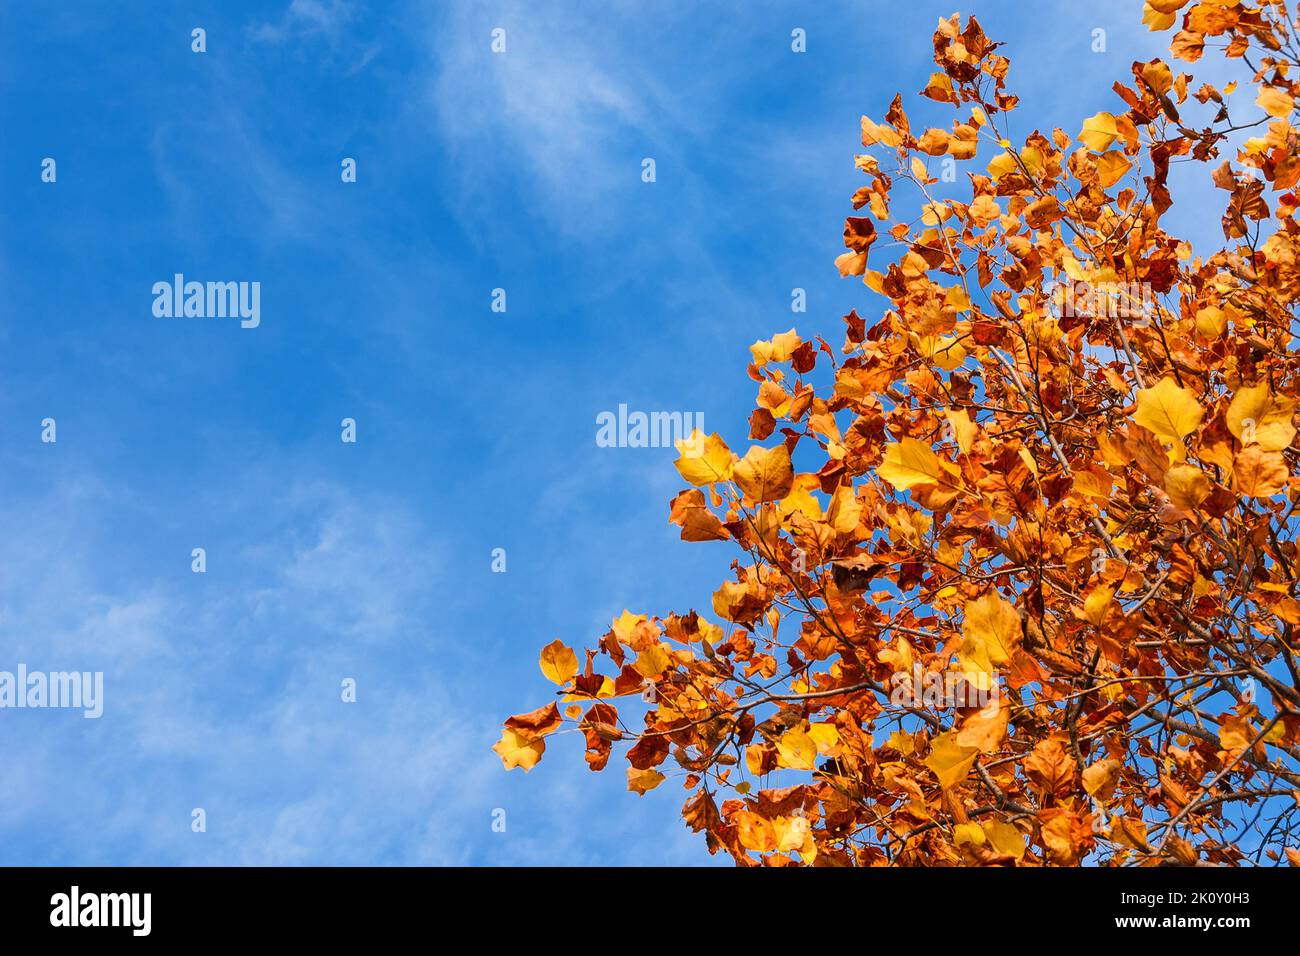 Liriodendron or tulip tree autumnal leaves and foliage background (with copy space) Stock Photo